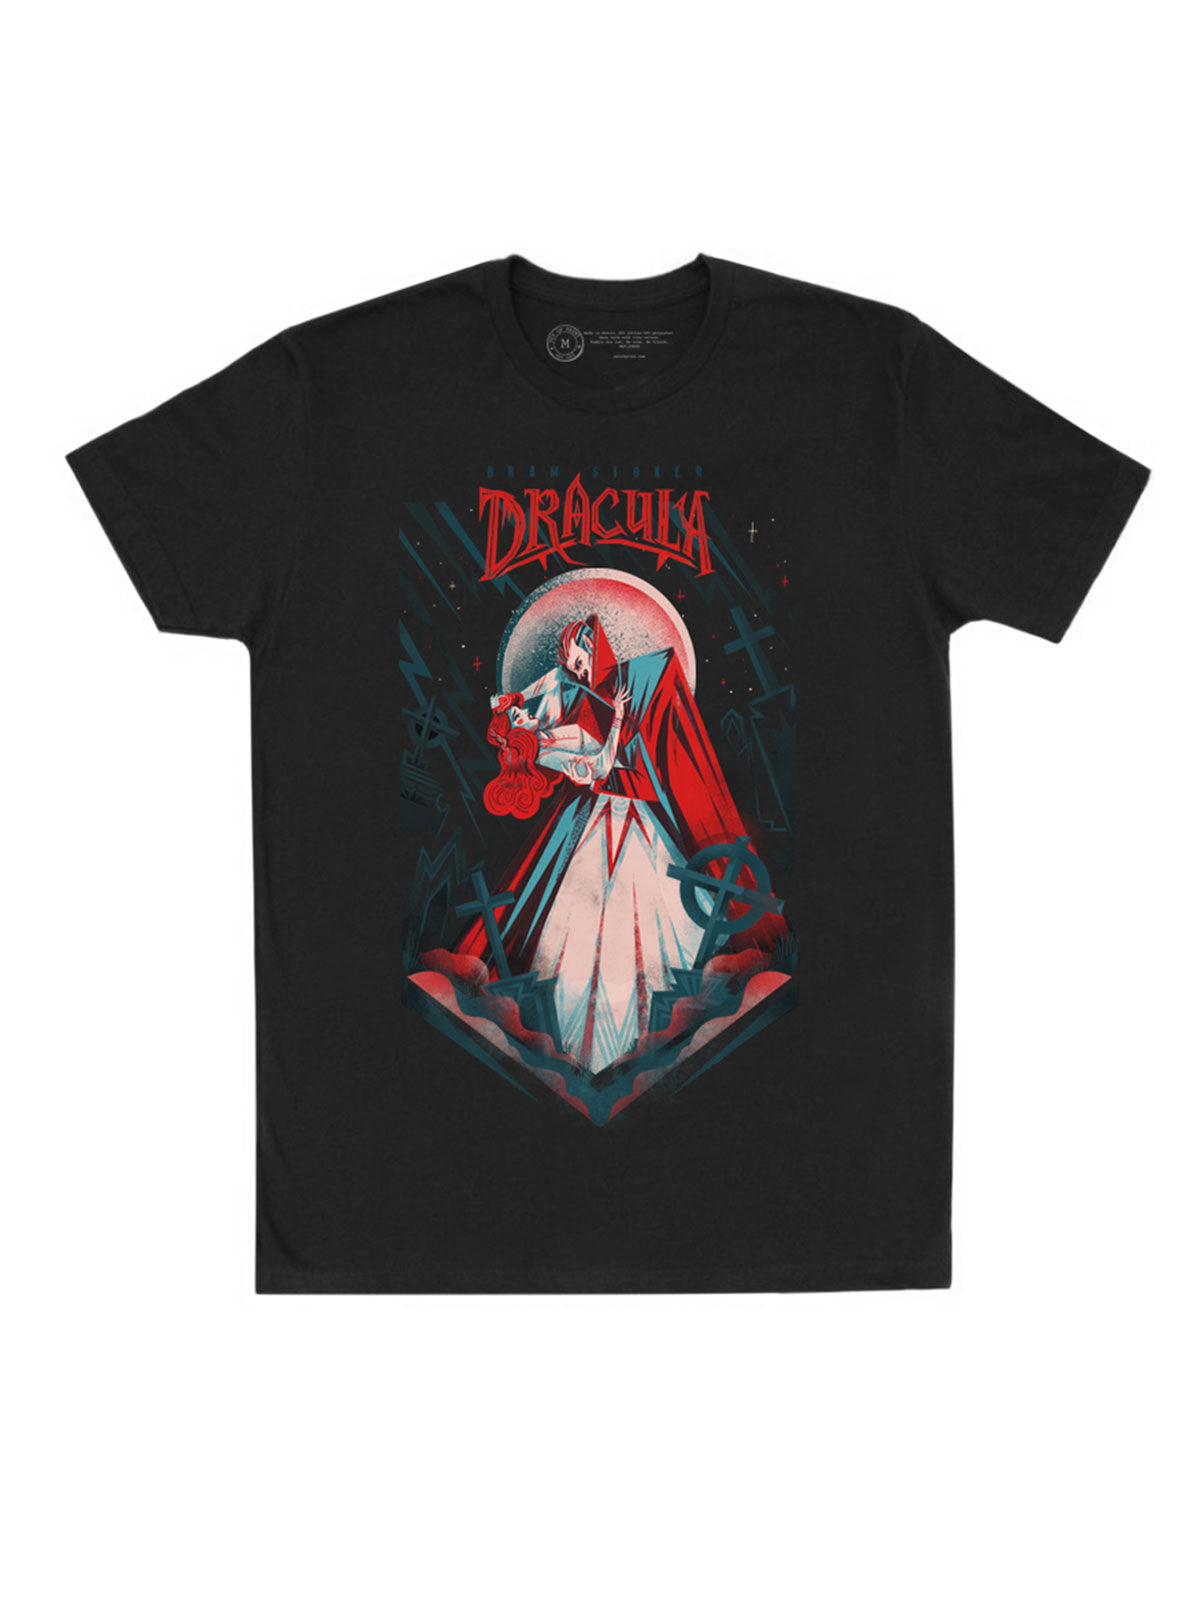 Dracula by Bram Stoker Book Cover Tee Collection